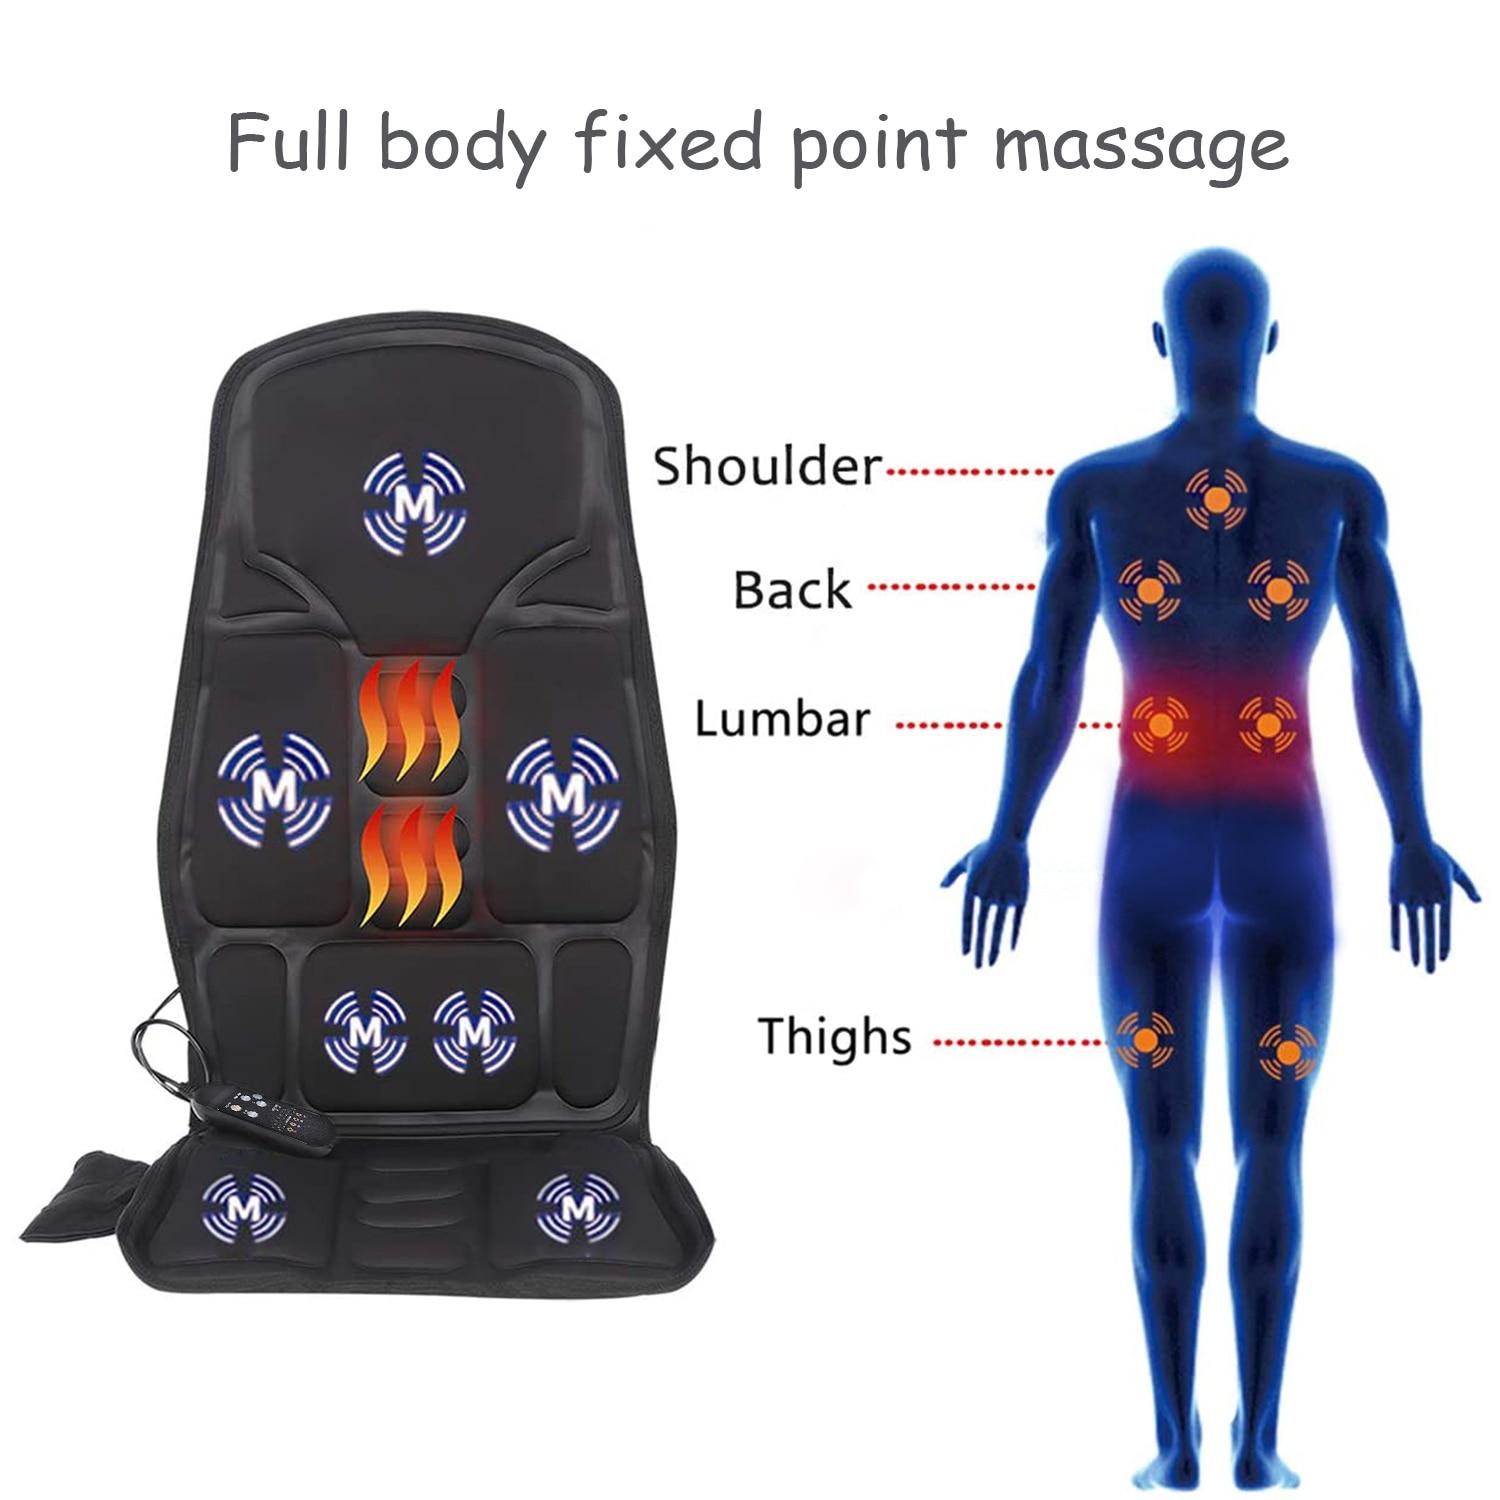 Electric Heating Back Massager Chair Pad Waist Body Massage Pain Relief Vibrating Massage Cushion for Car Home Office Chair